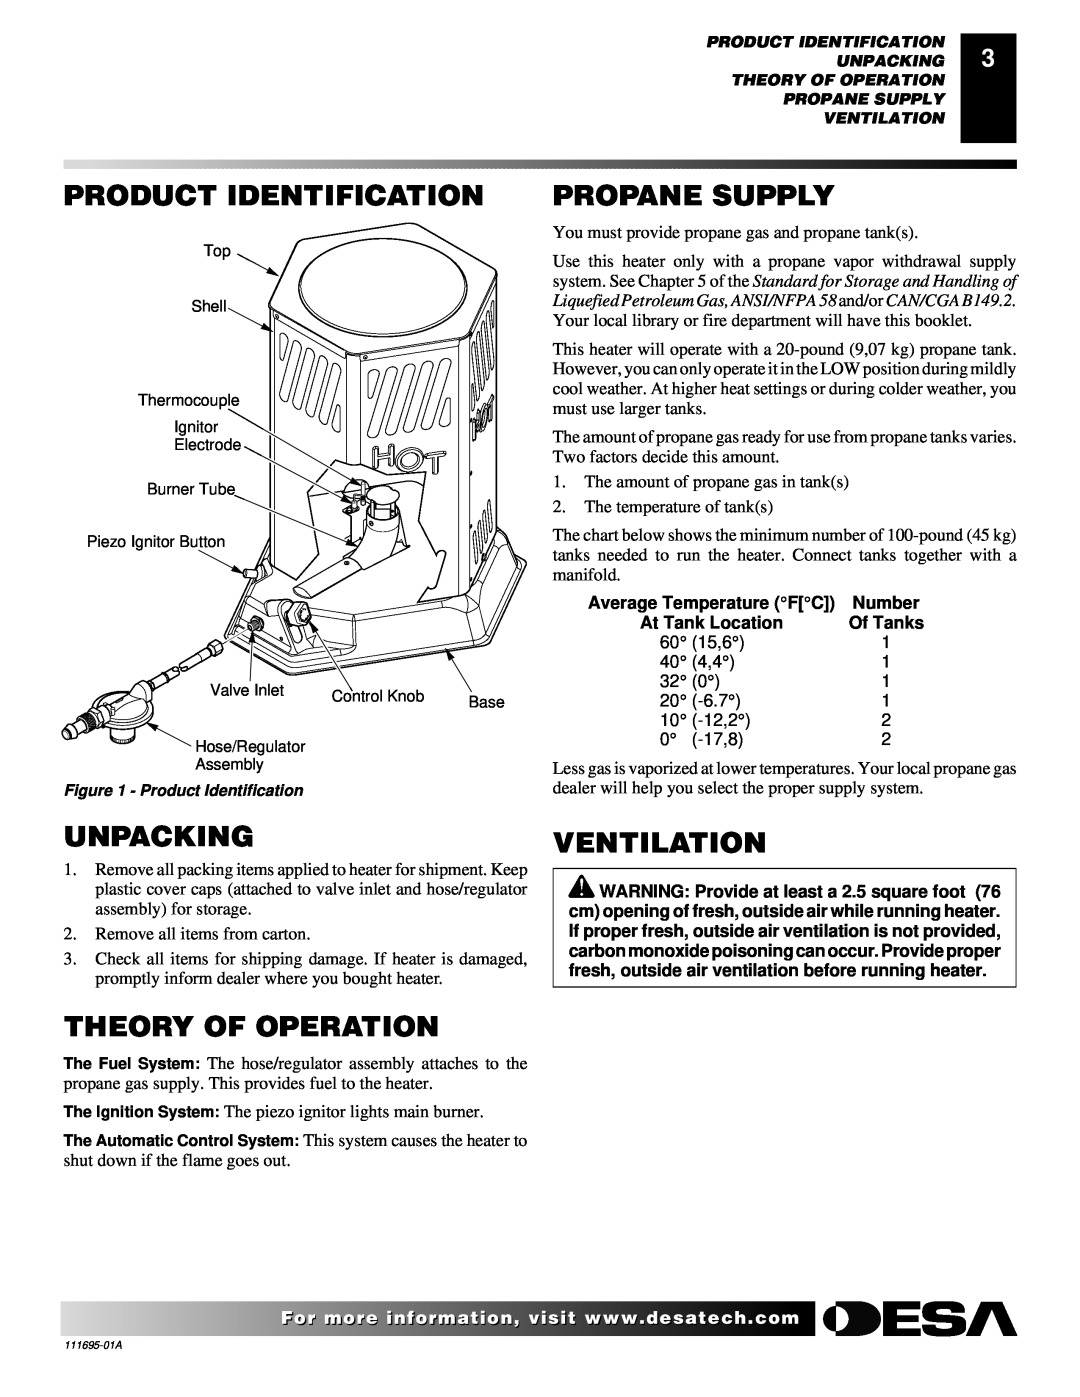 Desa 000 Btu/hr Models owner manual Product Identification, Propane Supply, Unpacking, Theory Of Operation, Ventilation 